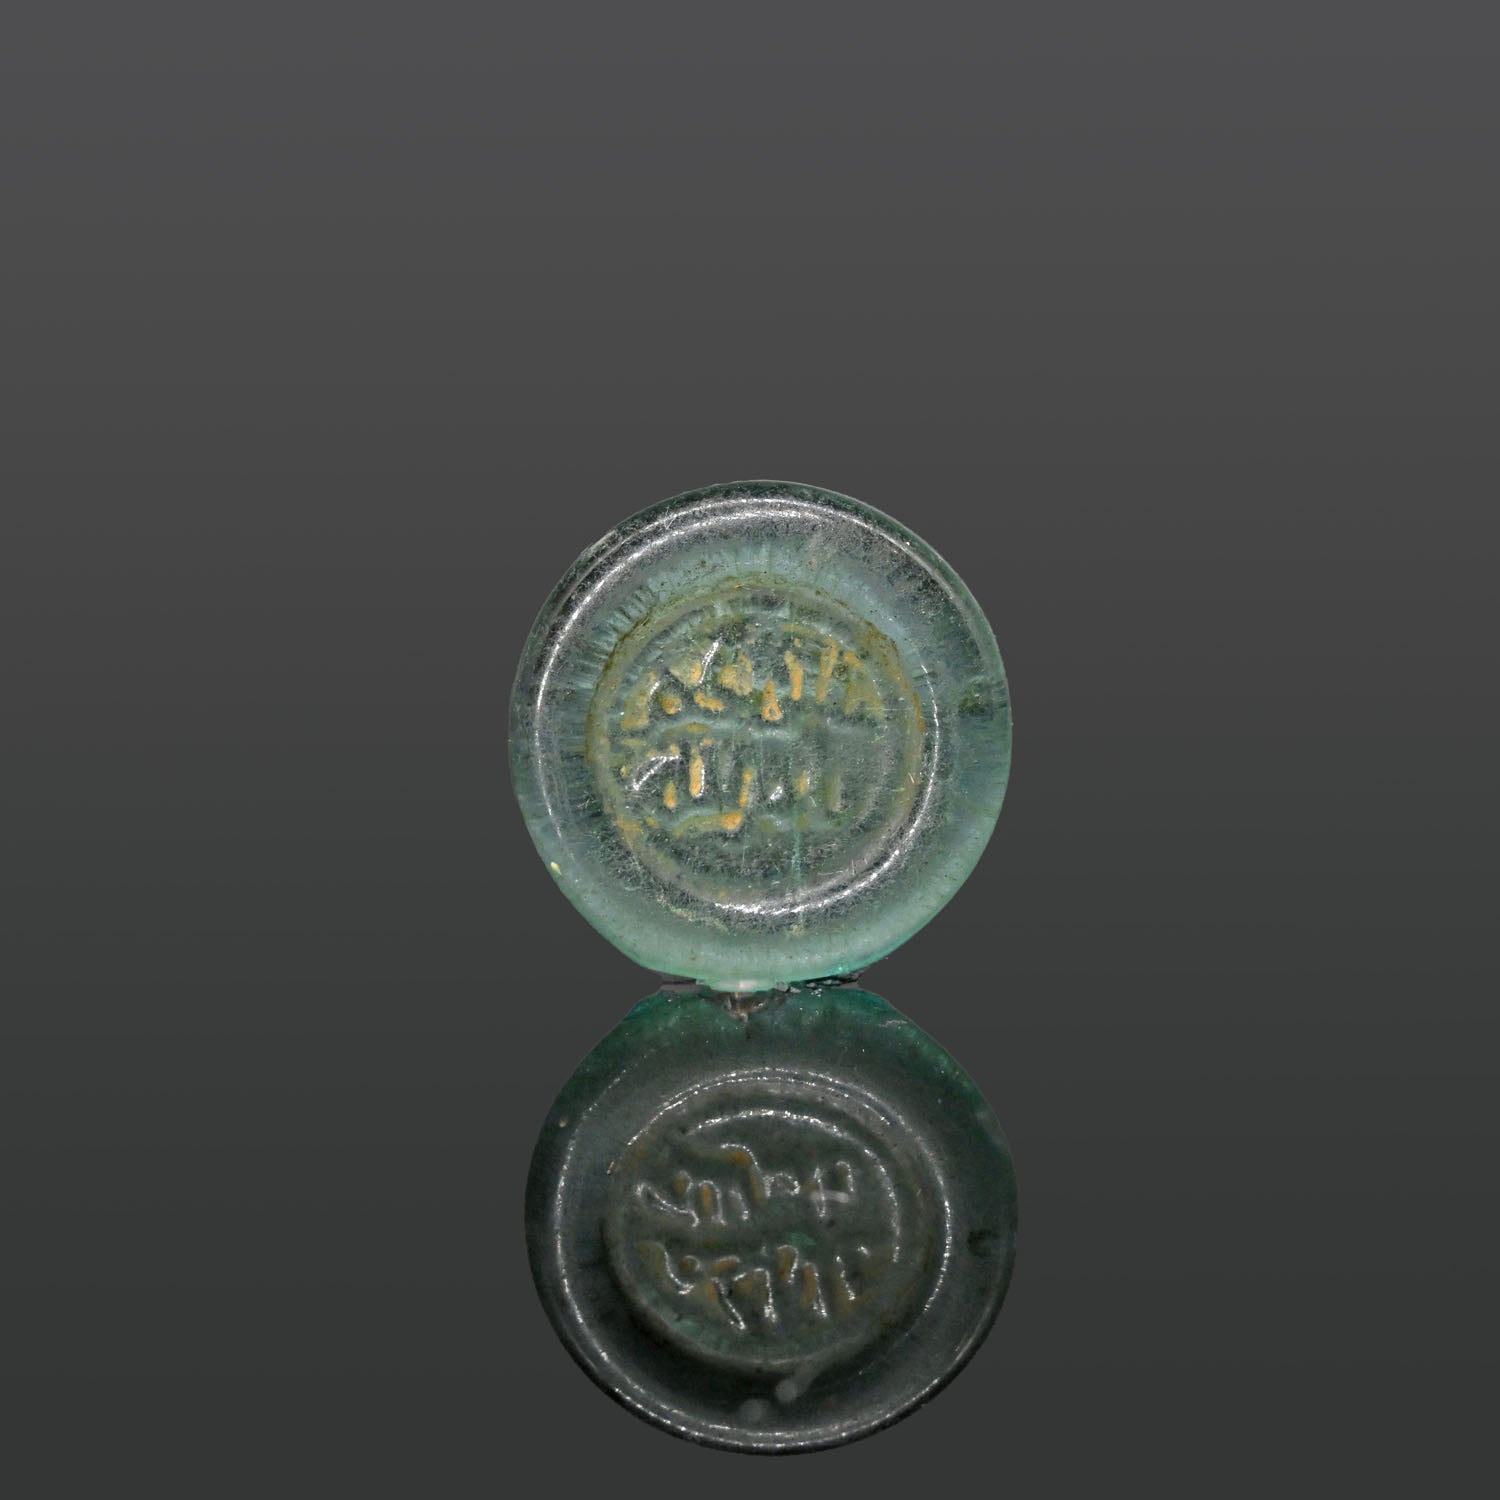 An Islamic Glass Coin Weight, ca. 9th - 11th century CE